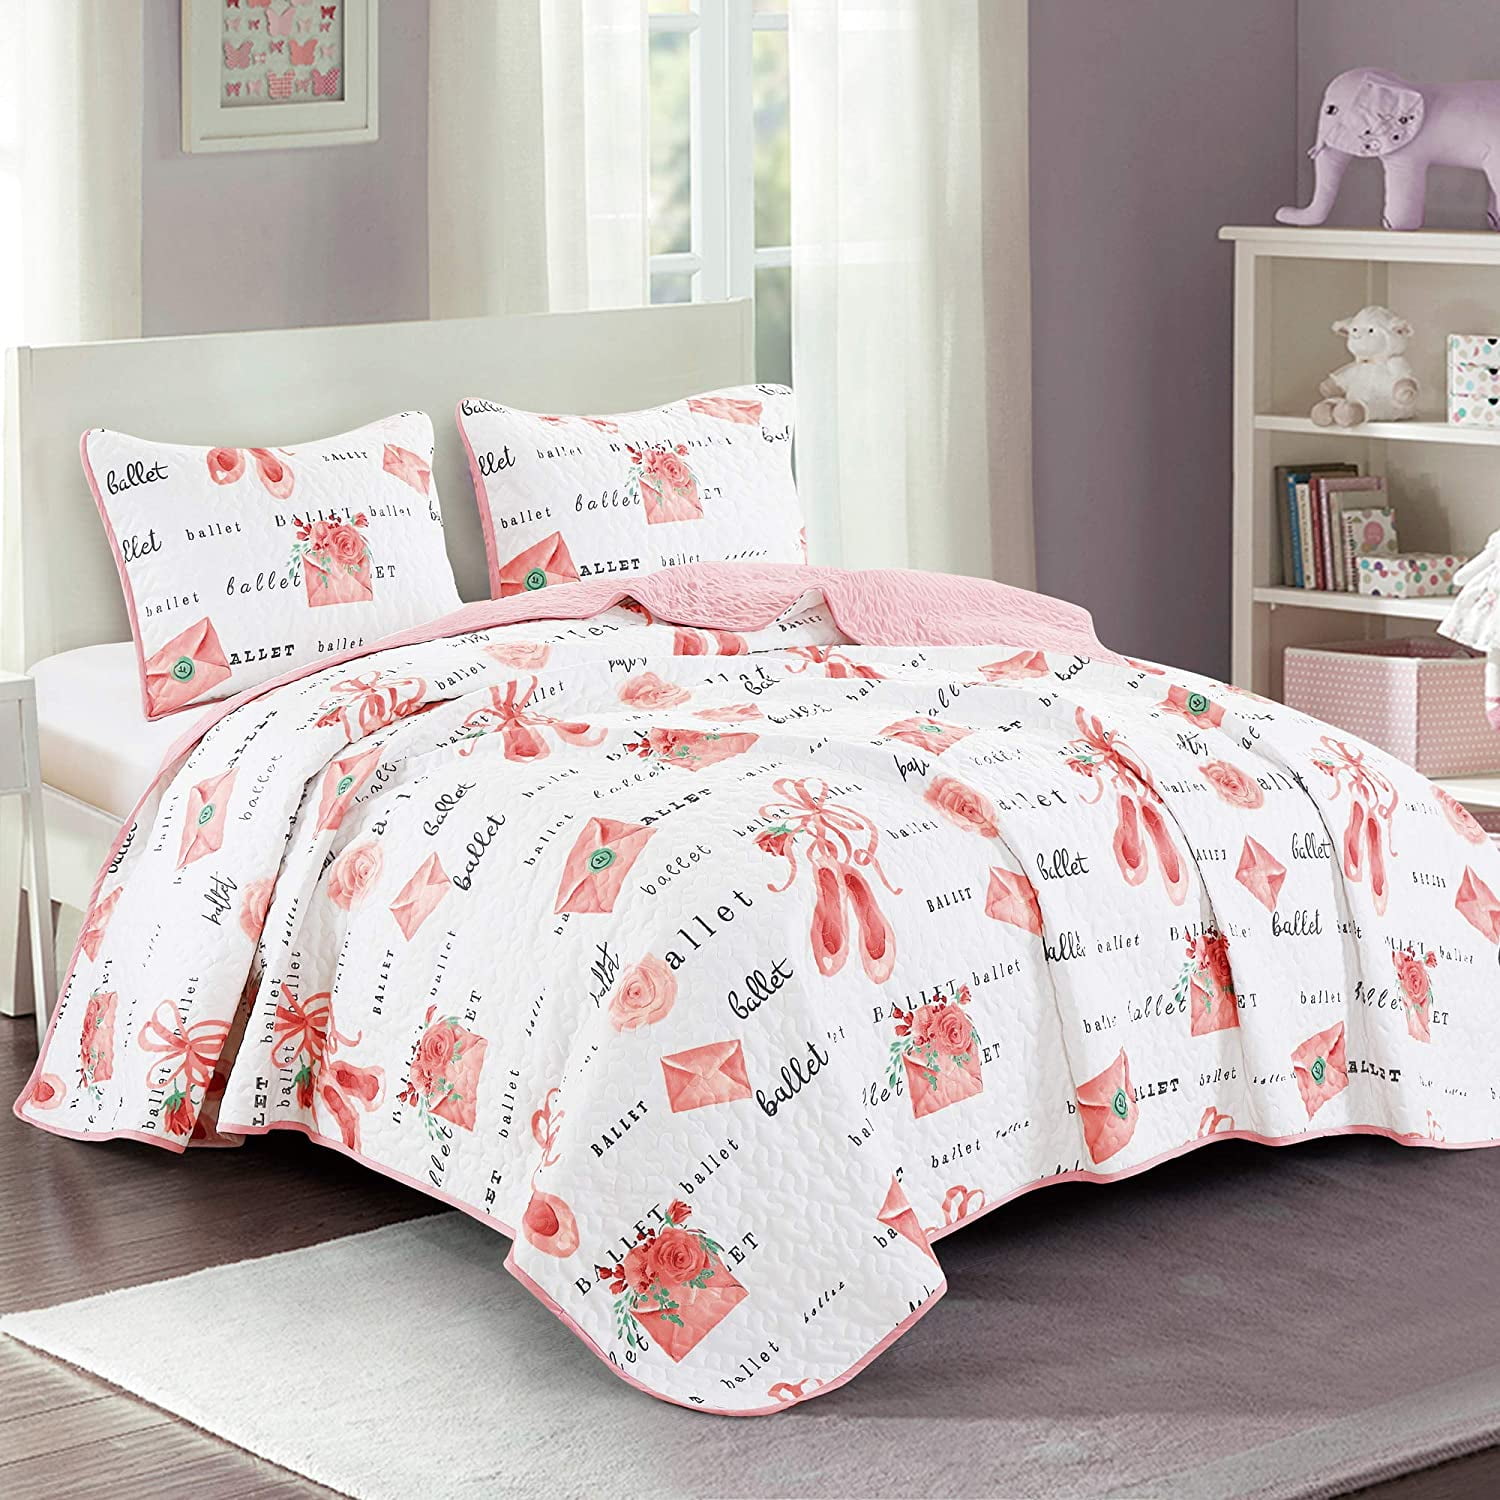 Uther Summer Quilts Twin Flamingos Printed Thin Comforter Cotton Filled Air Conditioning Blankets for Kids Adults